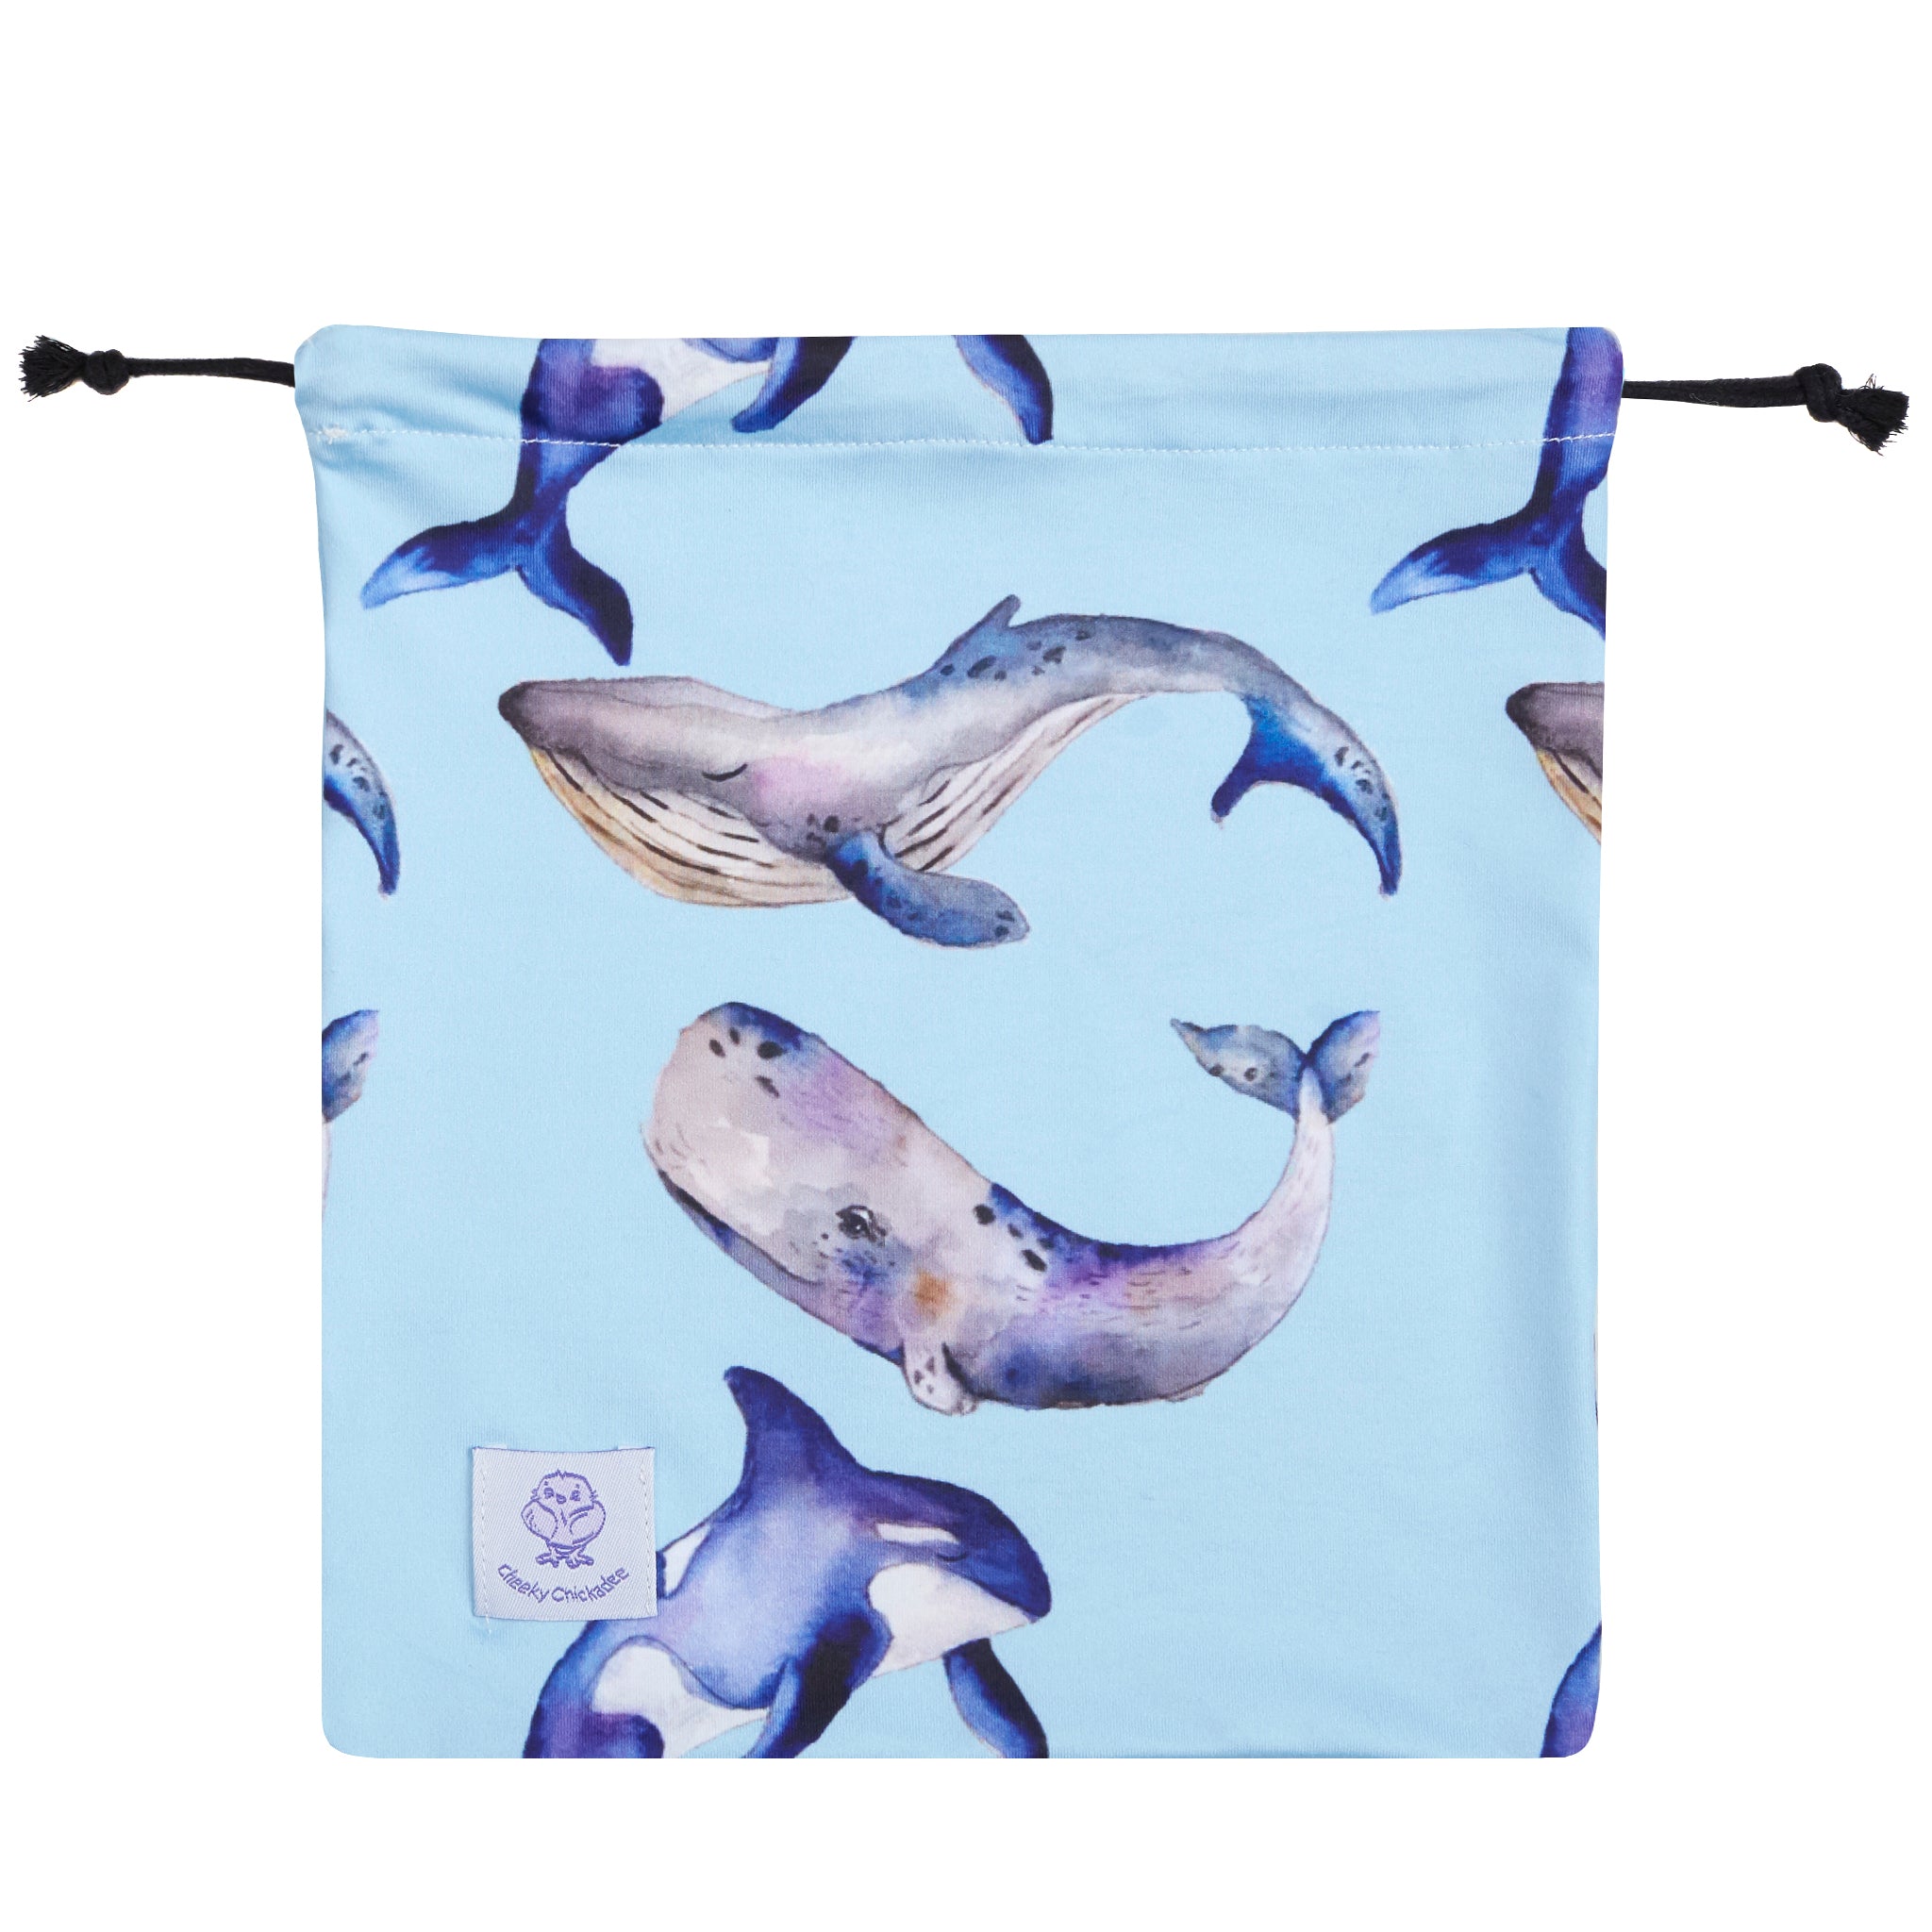 Whales Unisex Long Sleeve Zip Swimmers - Cheeky Chickadee Store